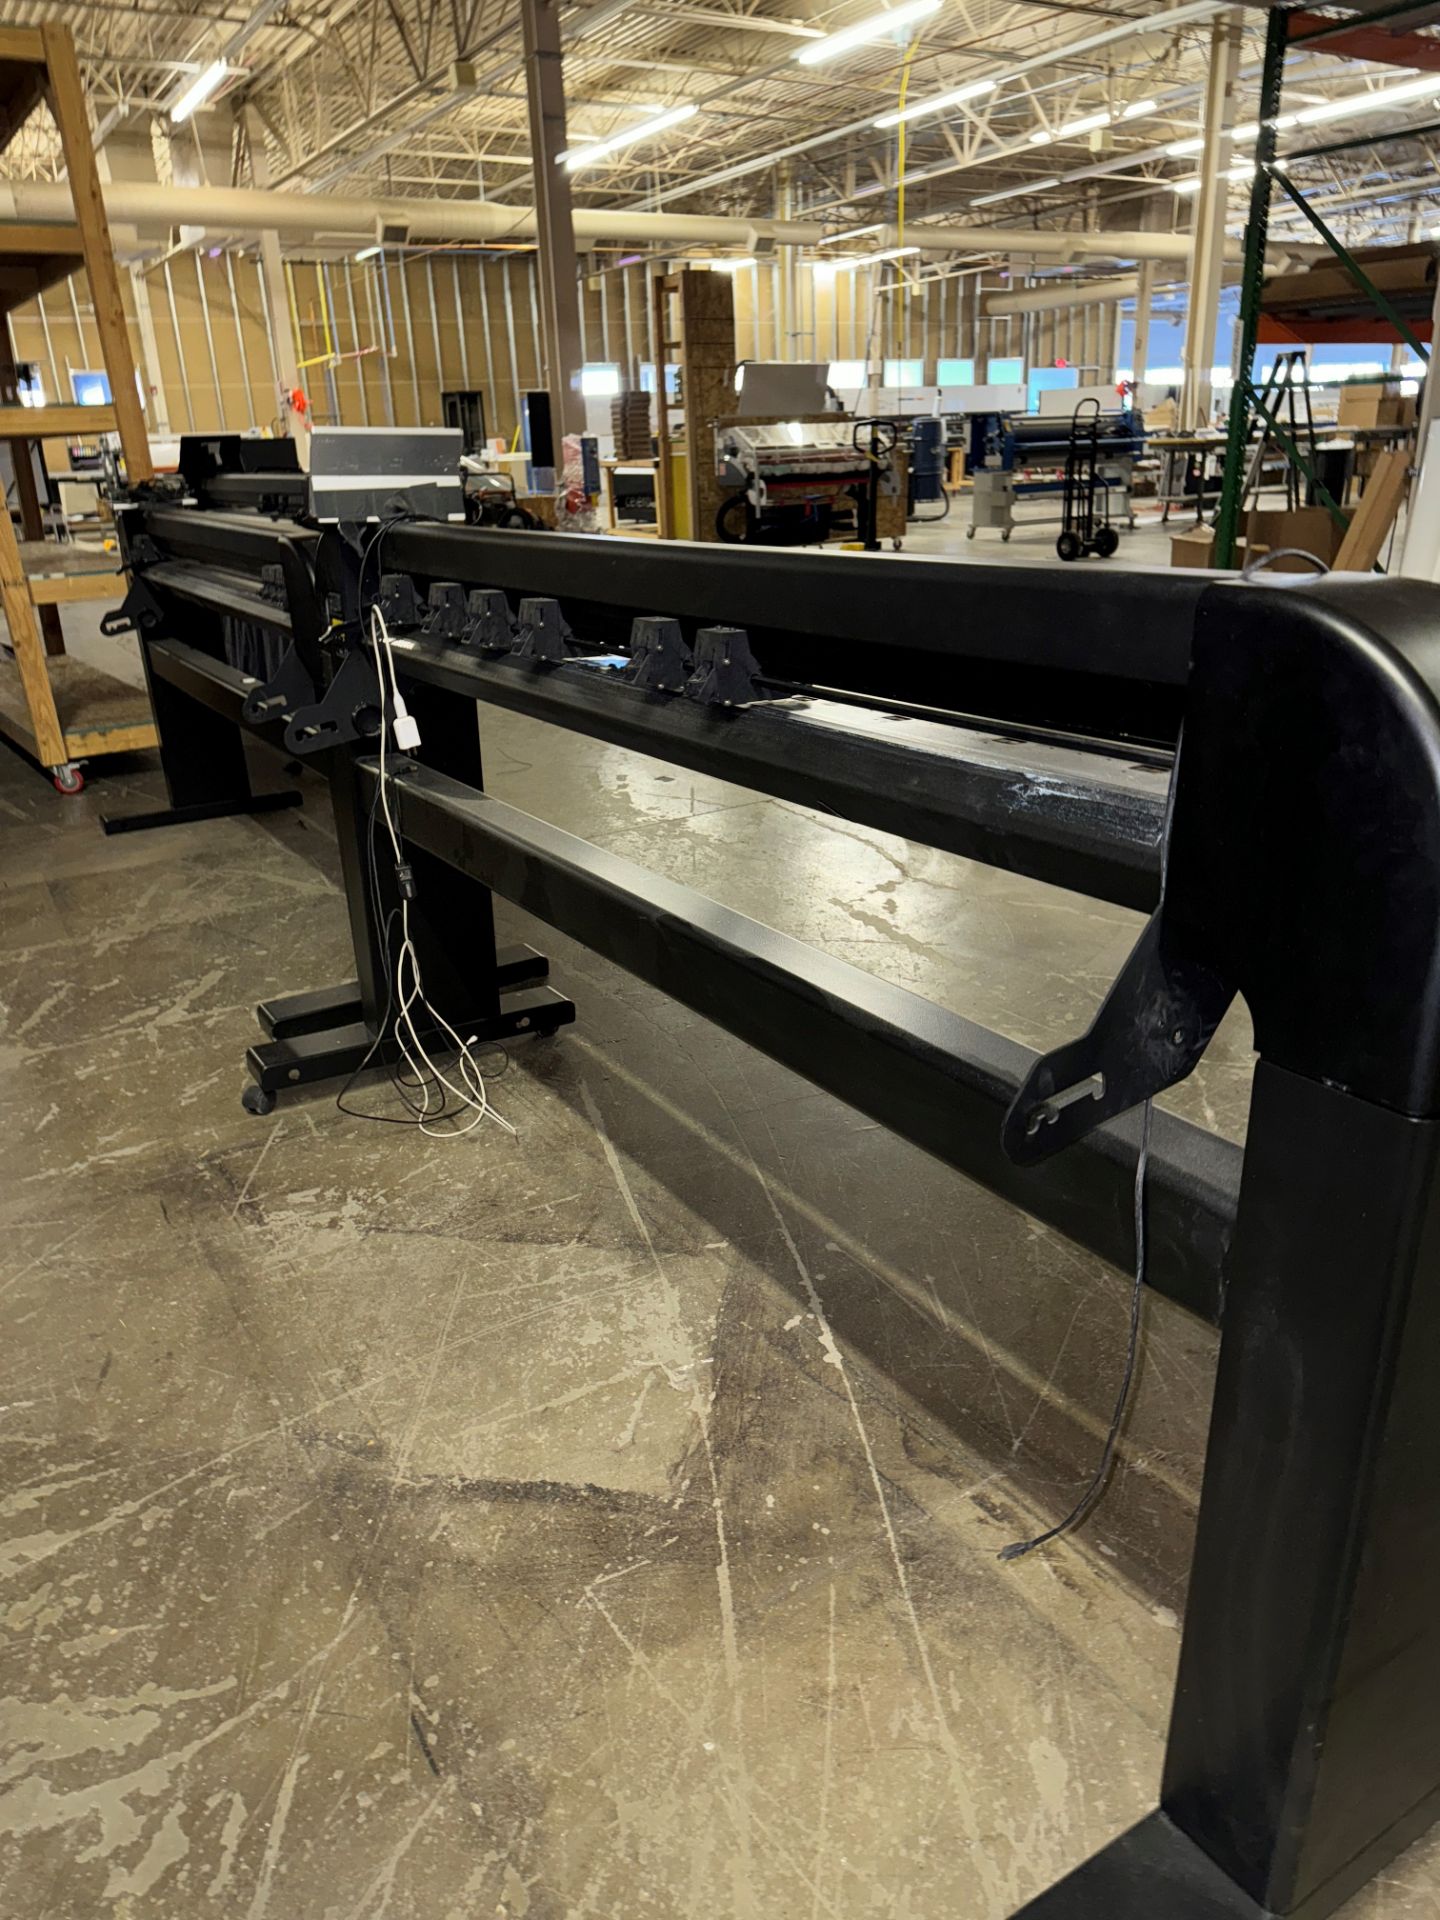 LOT (2) Cam 160 S2 Class 62"" Vinyl Cutters | Rig Fee $220 - Image 11 of 11